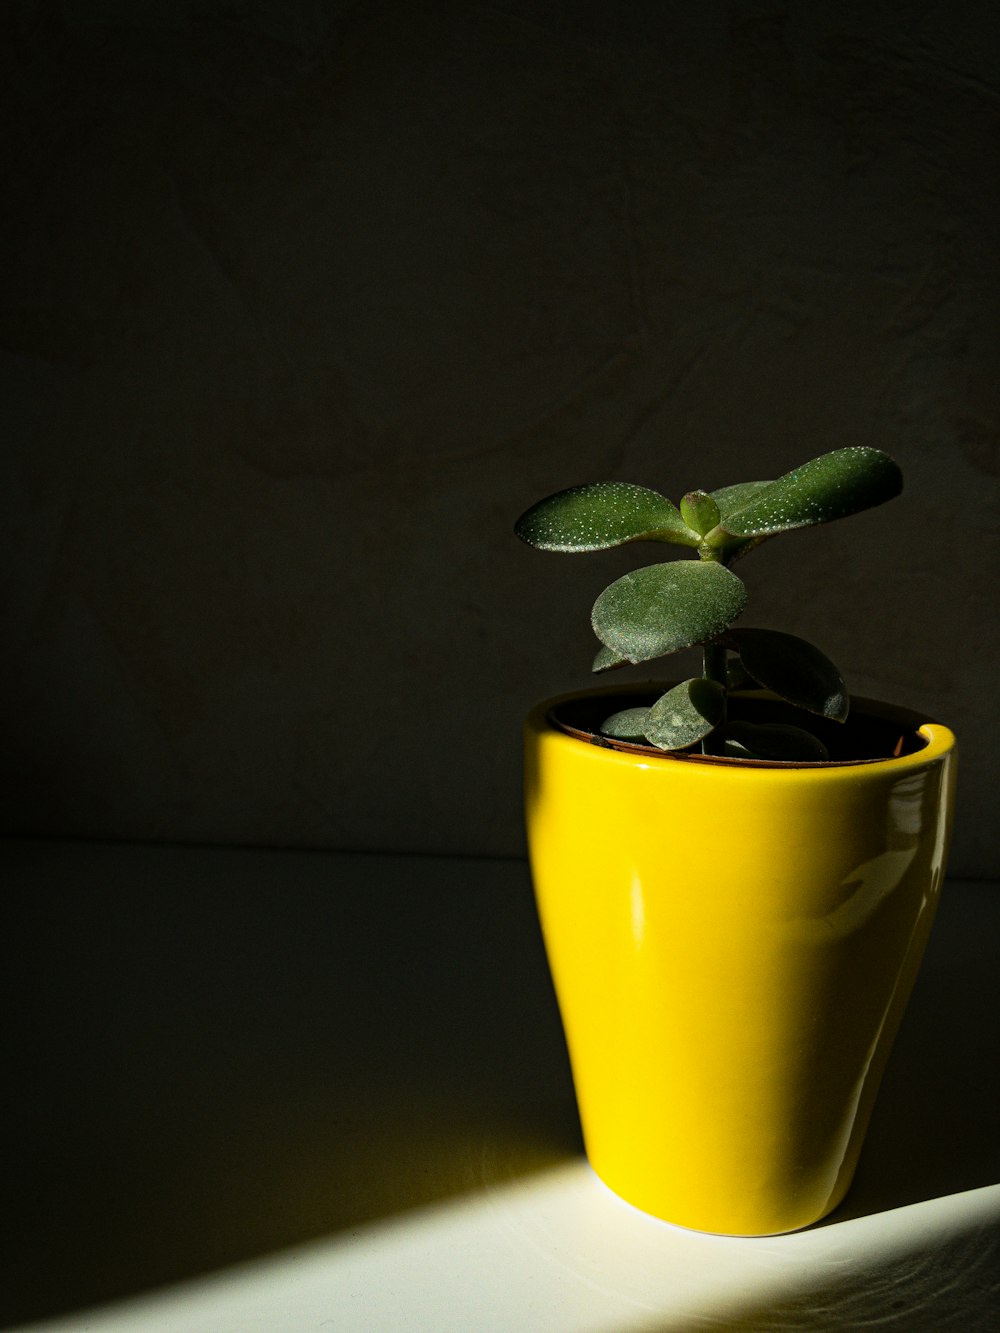 green plant in yellow pot